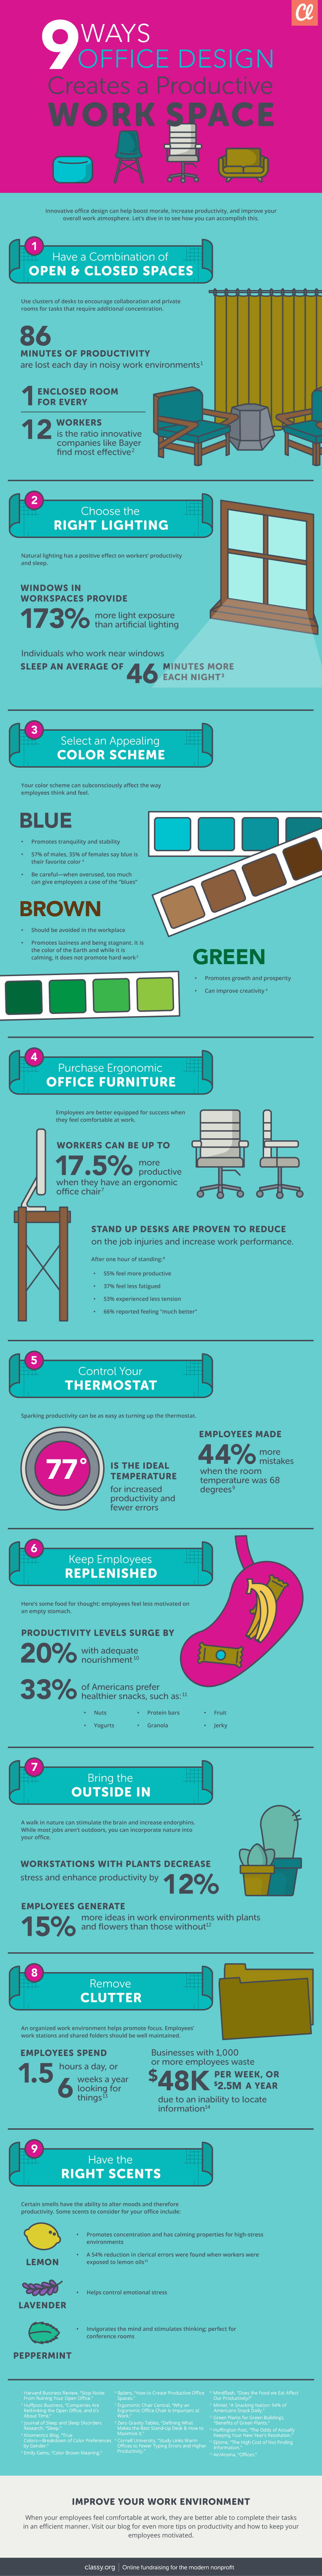 infographic office design